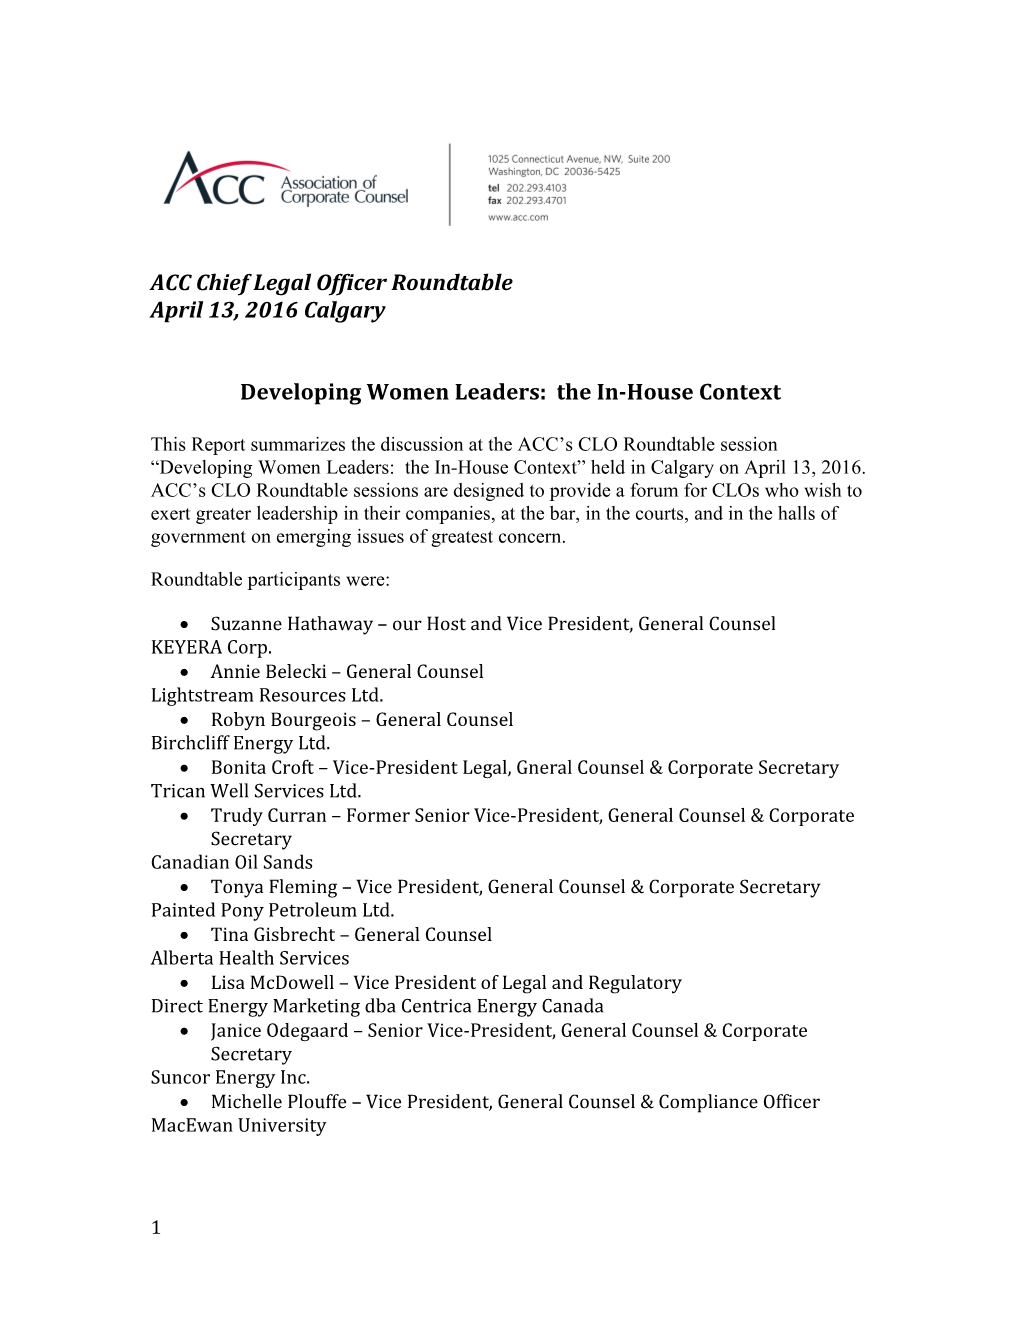 ACC Chief Legal Officer Roundtable